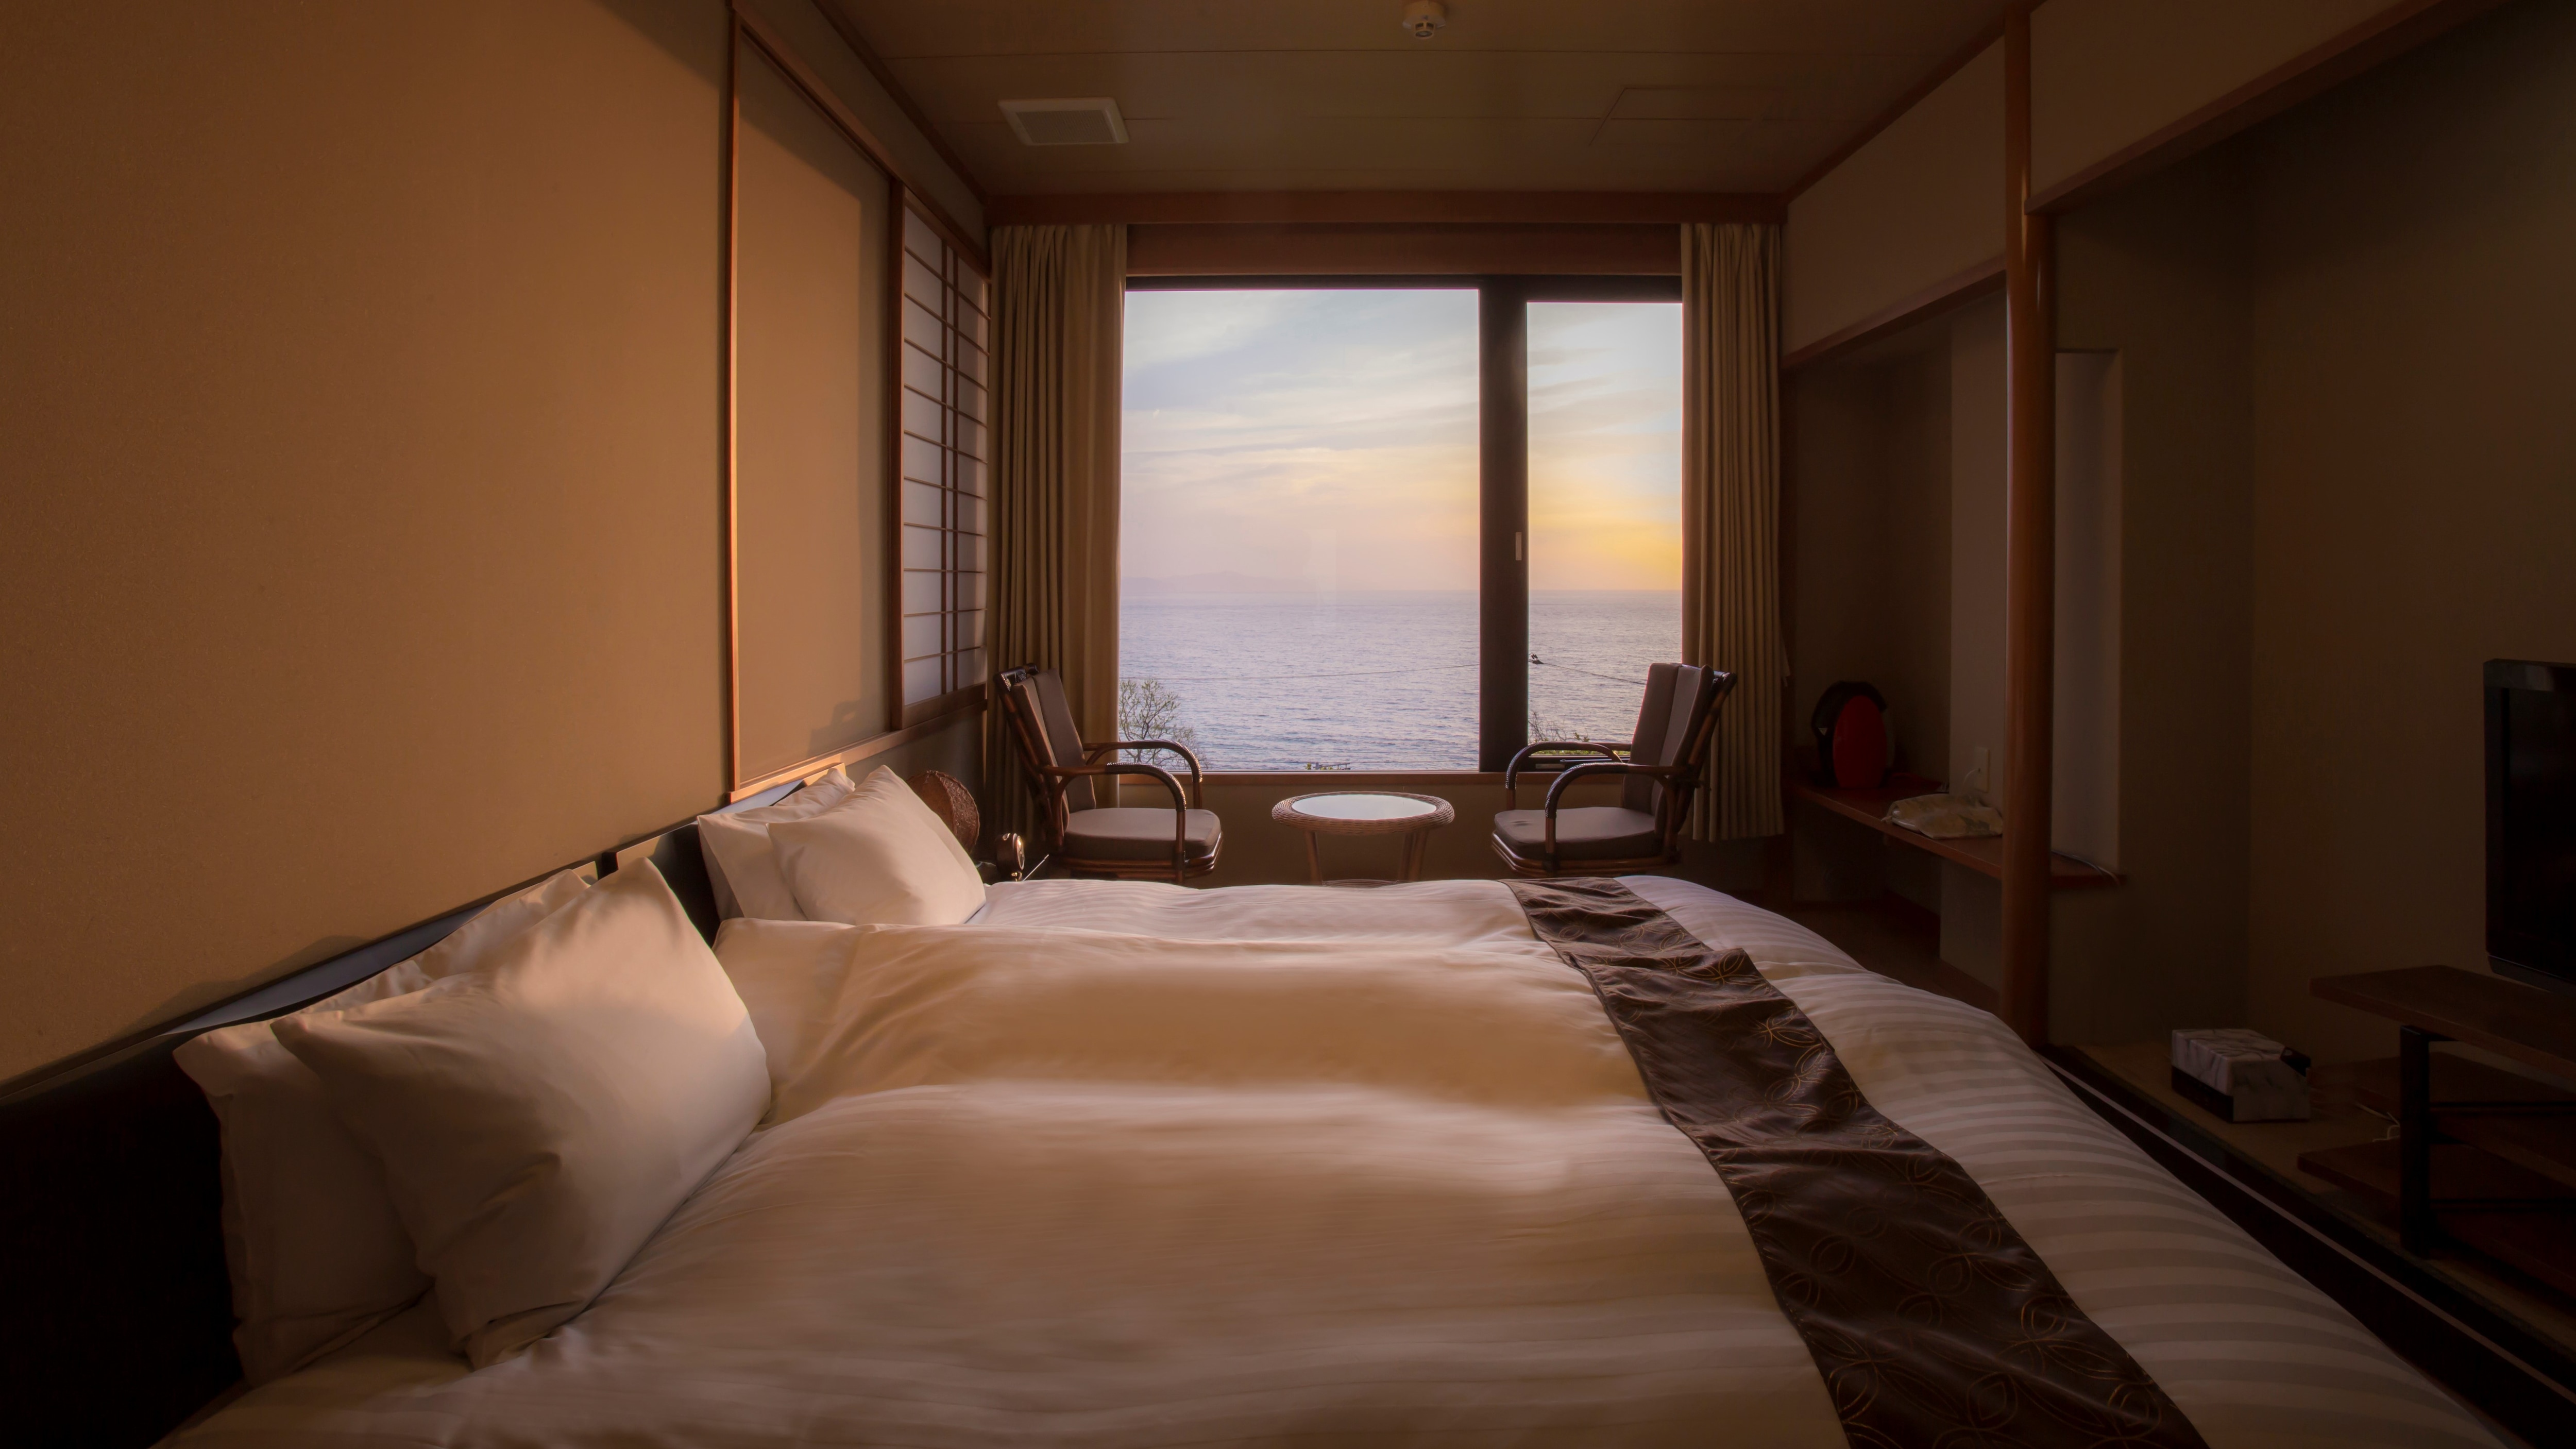 [1st floor: Shiotei] A Japanese-Western style room with a king-size bed and a relaxing view of the evening view.